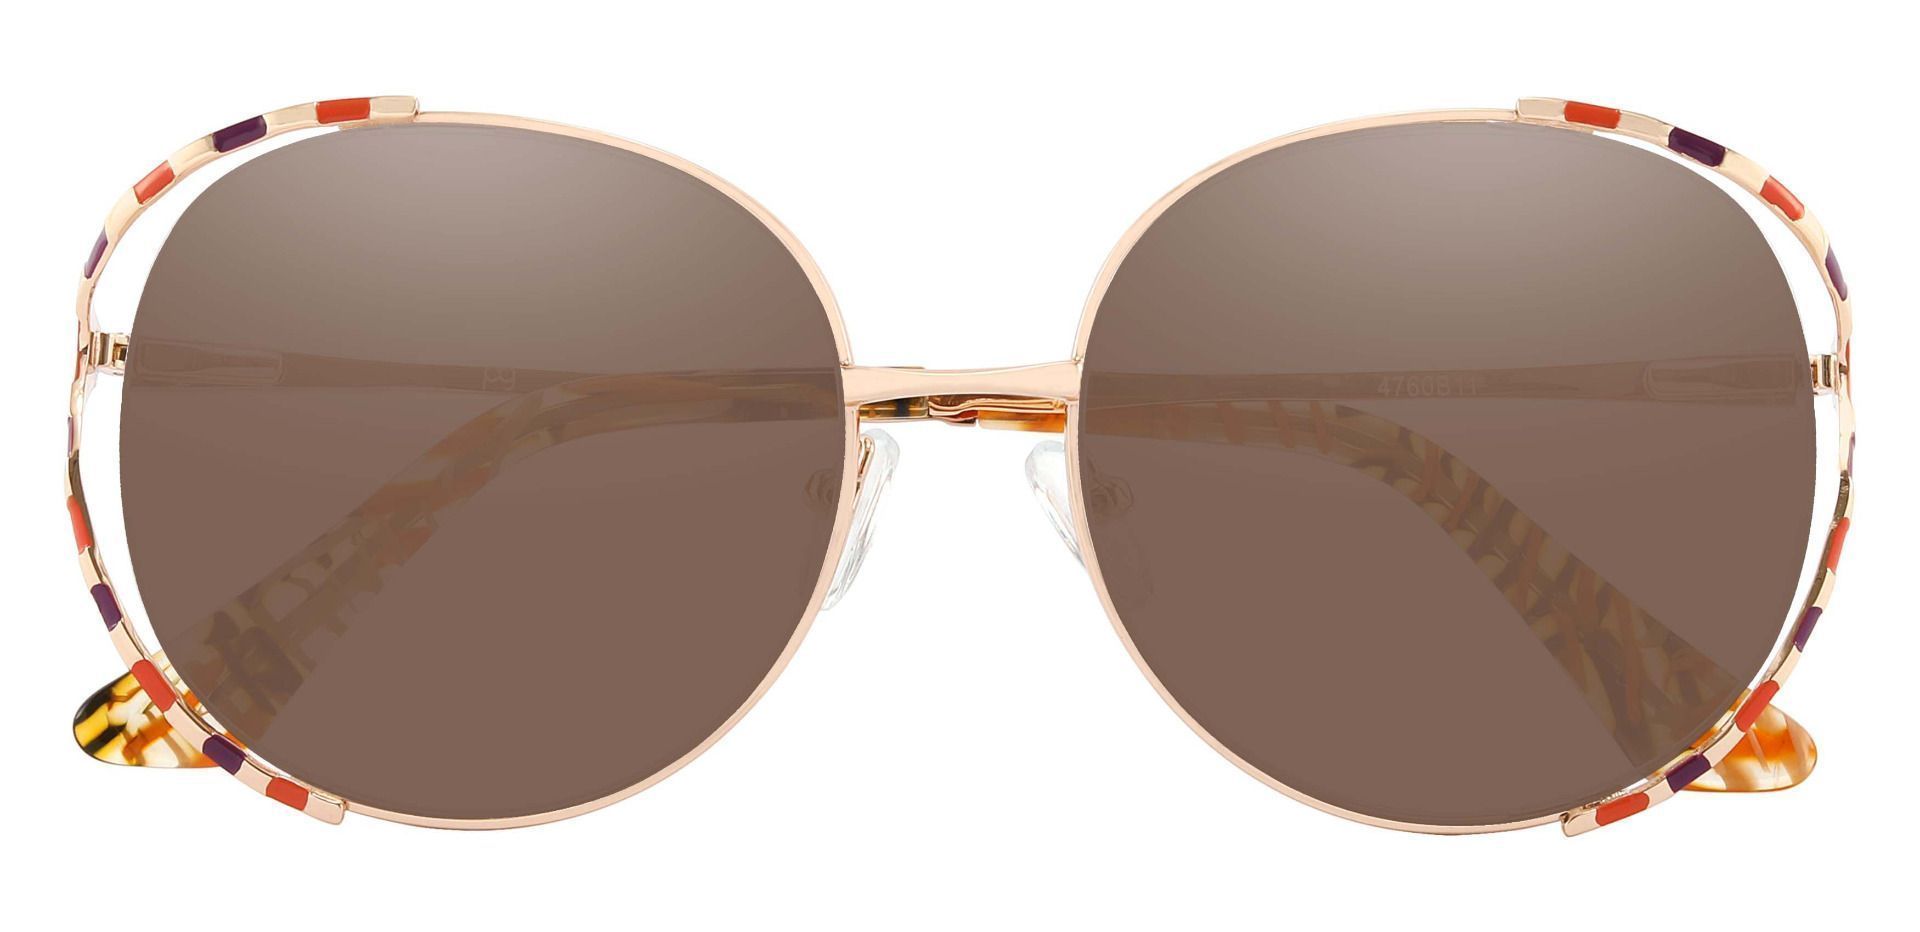 Dorothy Oval Non-Rx Sunglasses - Brown Frame With Brown Lenses